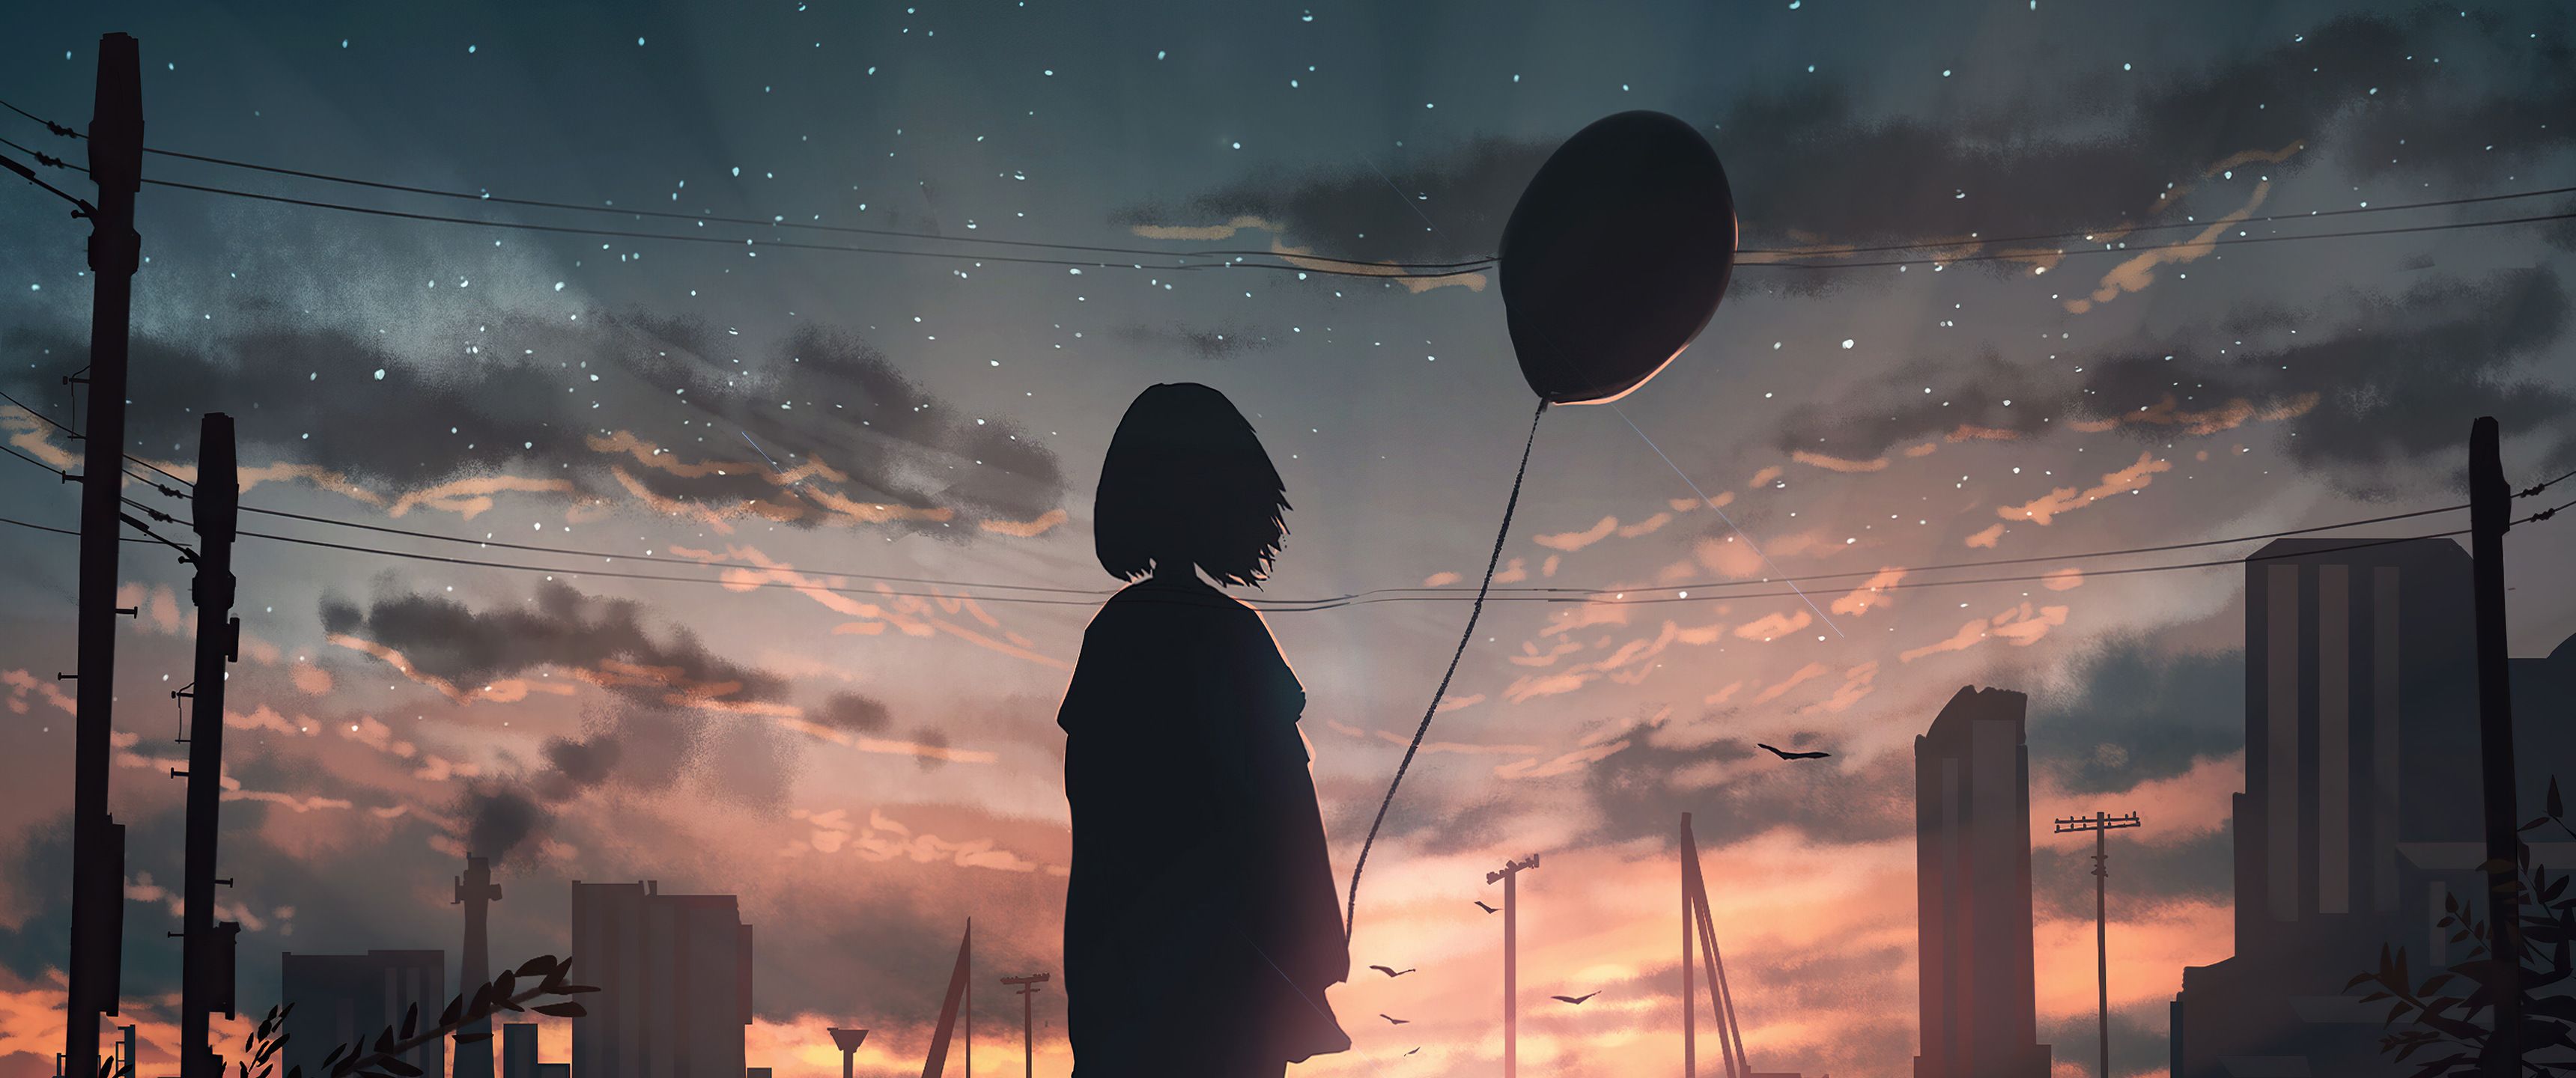 Anime Girl With Balloon In Hand 3440x1440 Resolution HD 4k Wallpaper, Image, Background, Photo and Picture